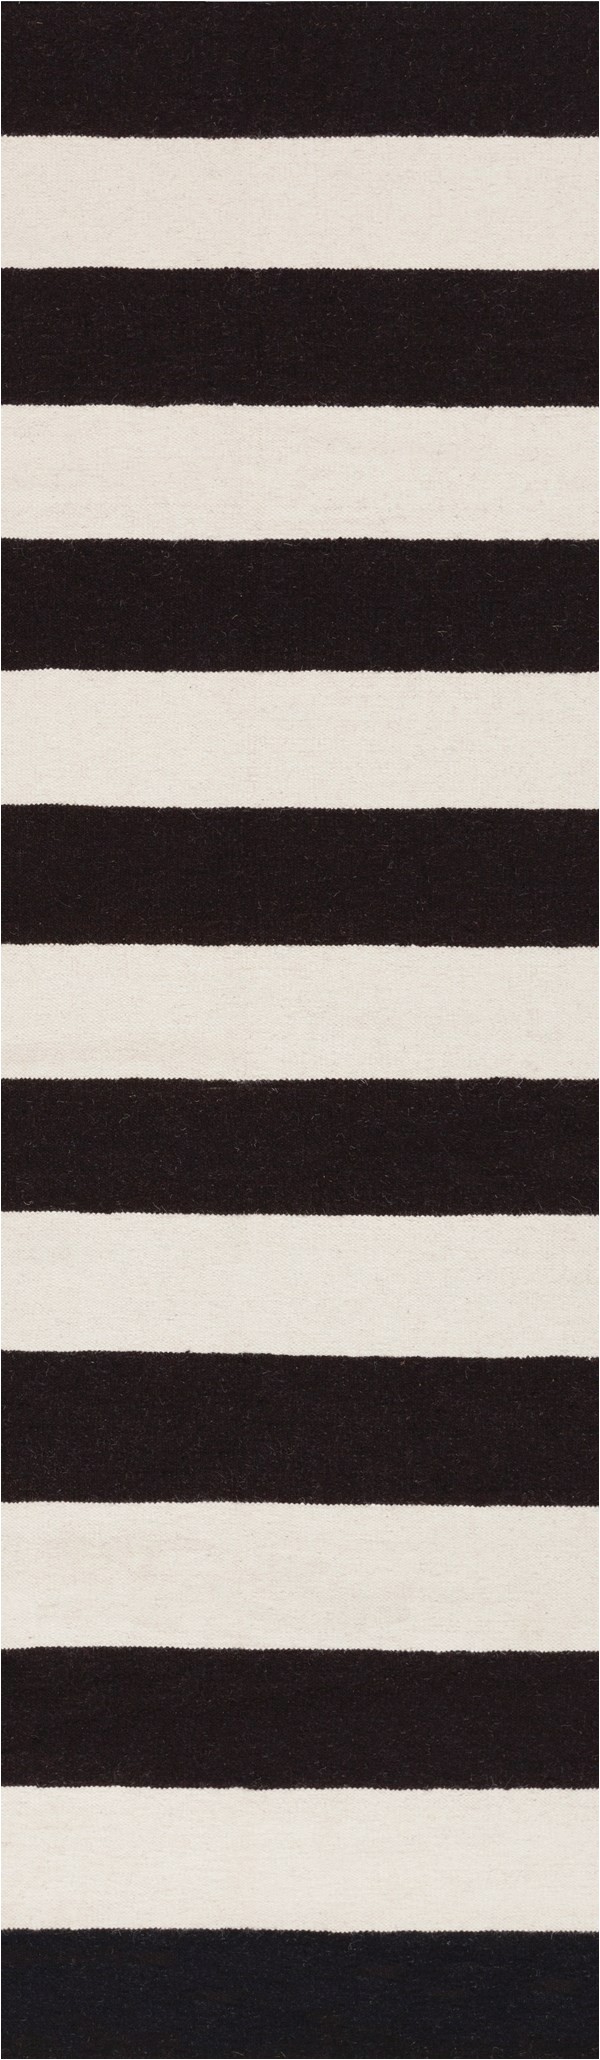 Black and White Striped area Rug 8×10 Surya Frontier Ft 295 area Rugs